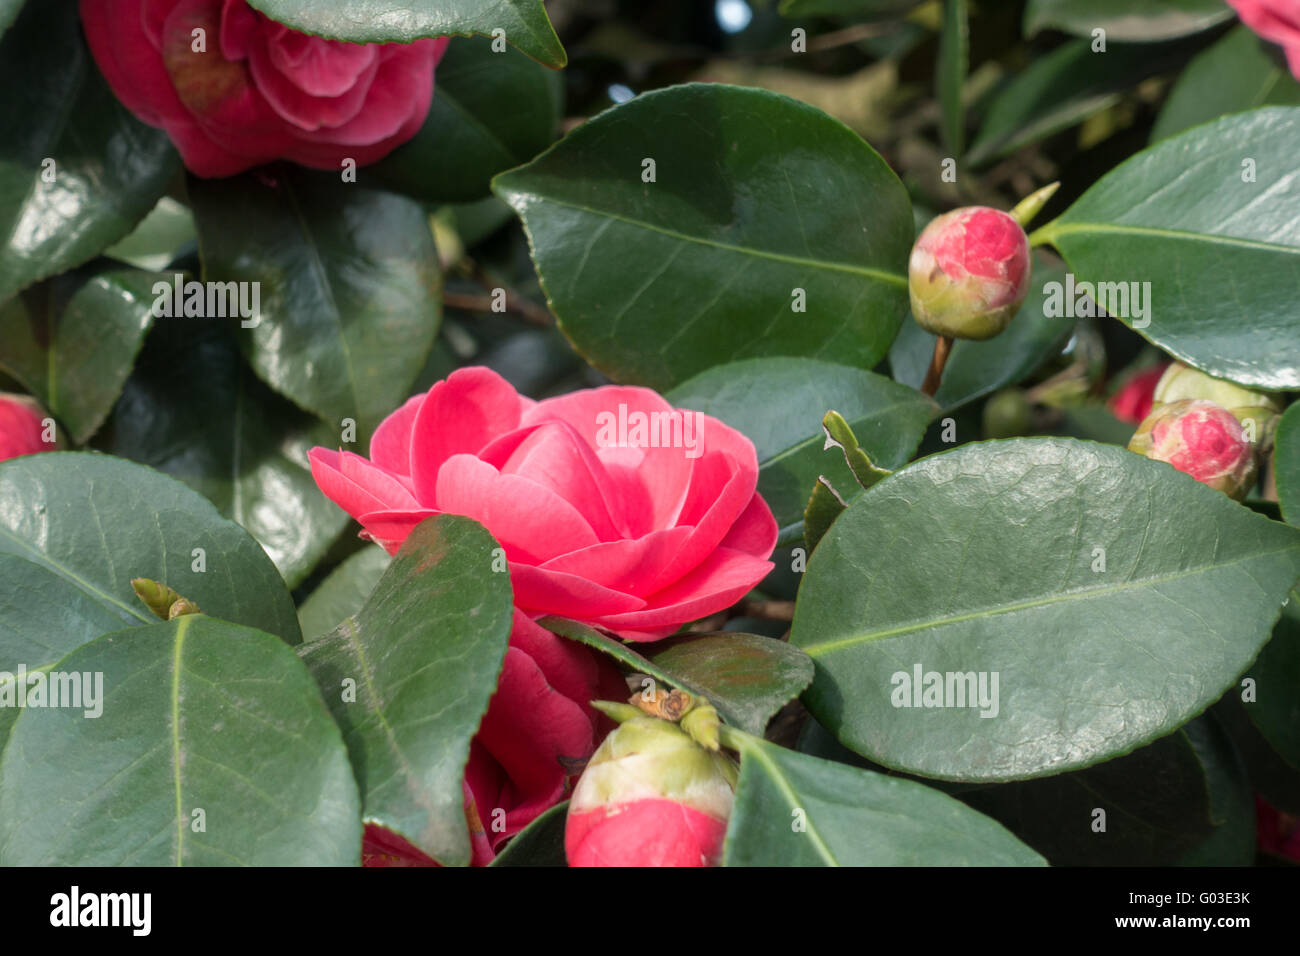 Red flowering Camellia with glossy green leaves Stock Photo